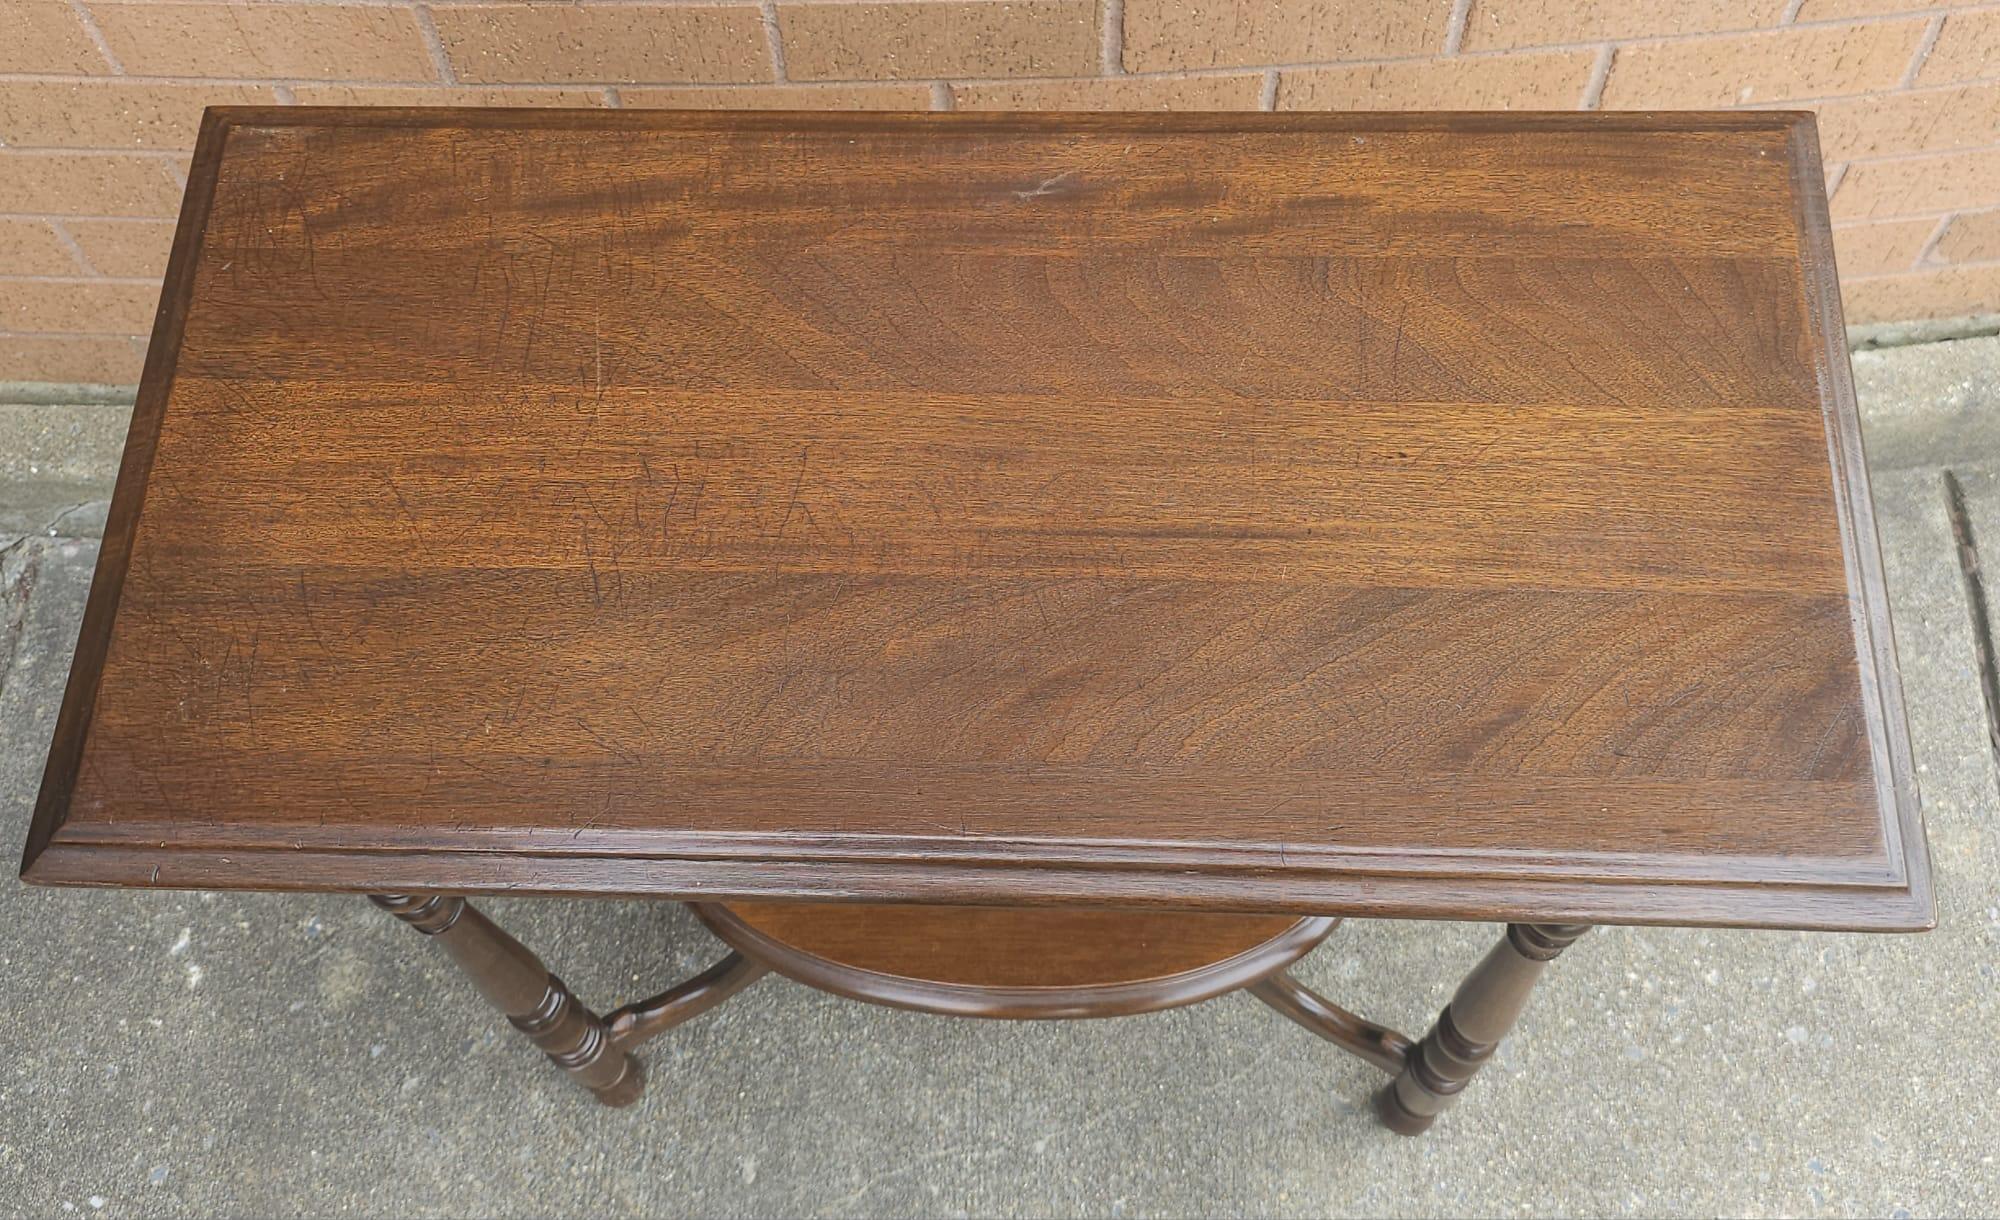 Victorian Mahogany Tiered Console Table In Good Condition For Sale In Germantown, MD